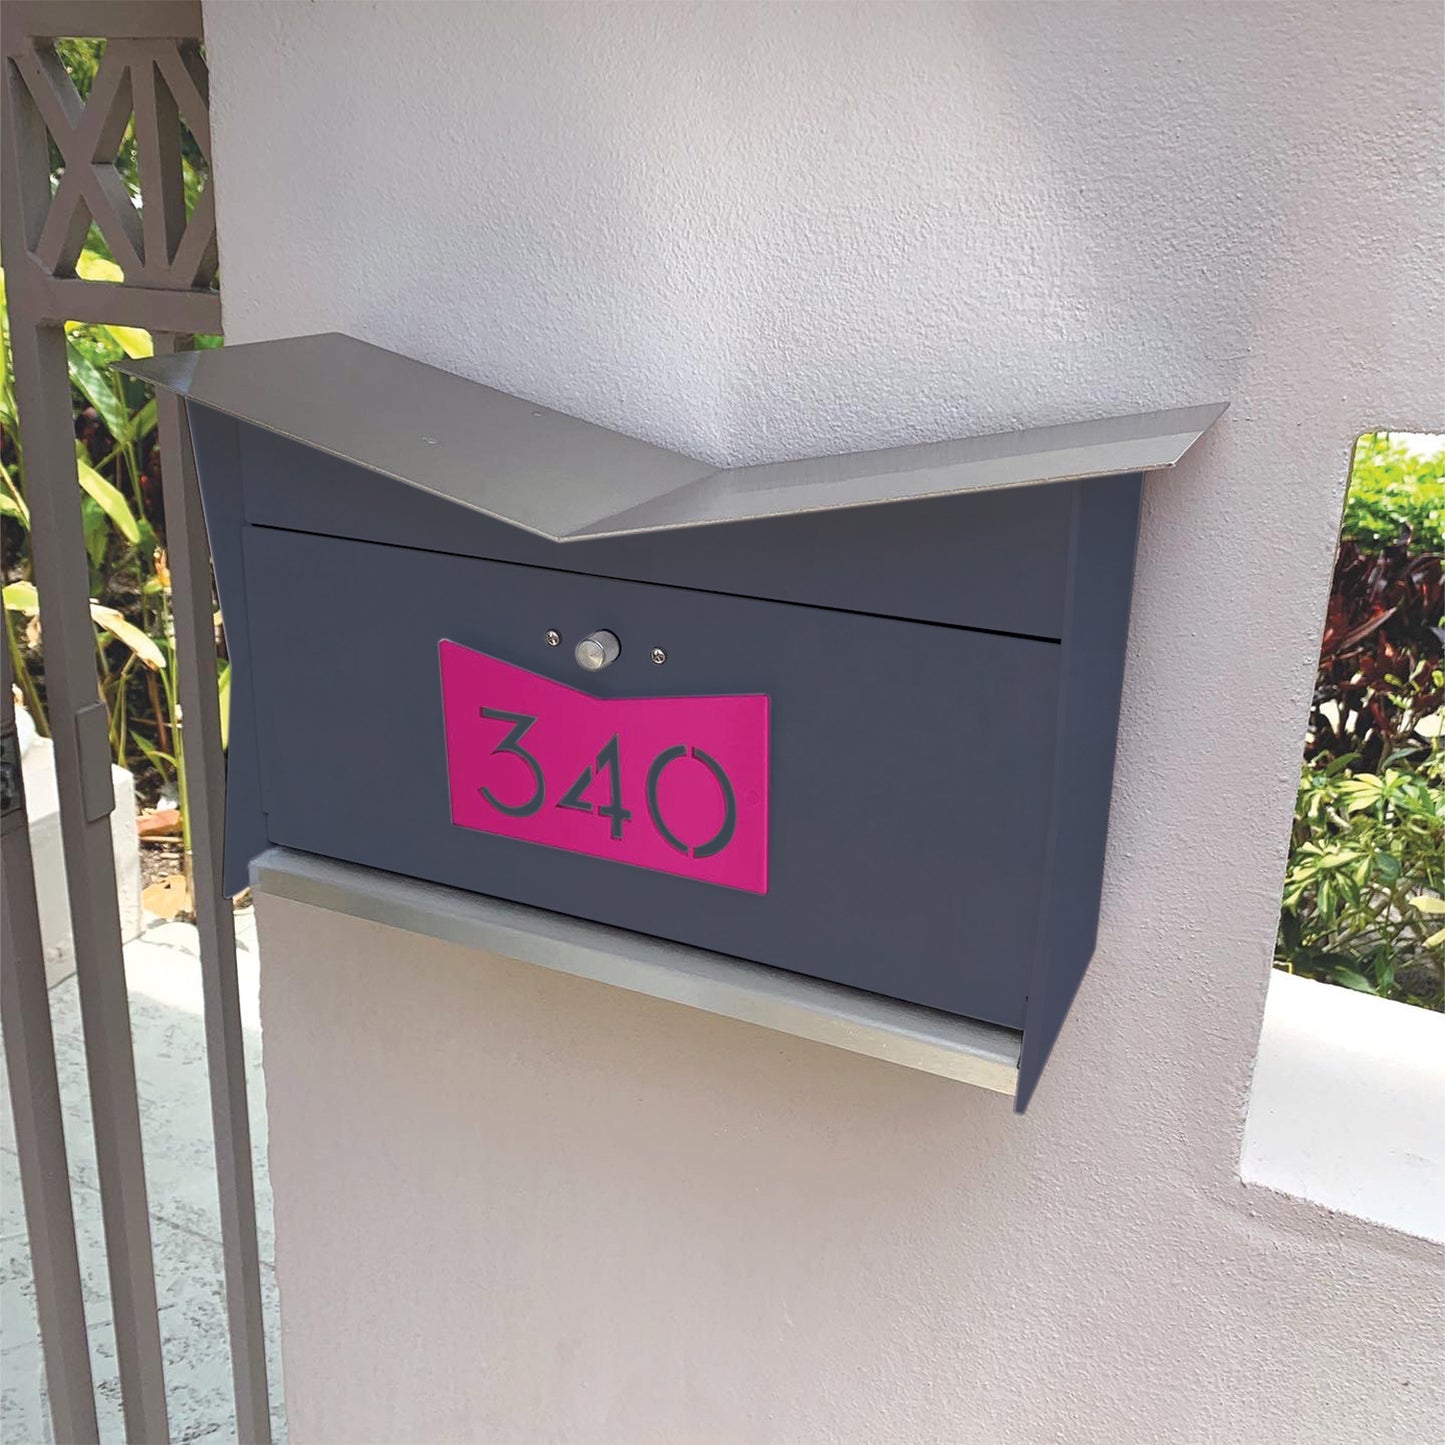 Wall Mount Mailbox mounted to outdoor wall. ButterFly Box in designer gray and neon pink